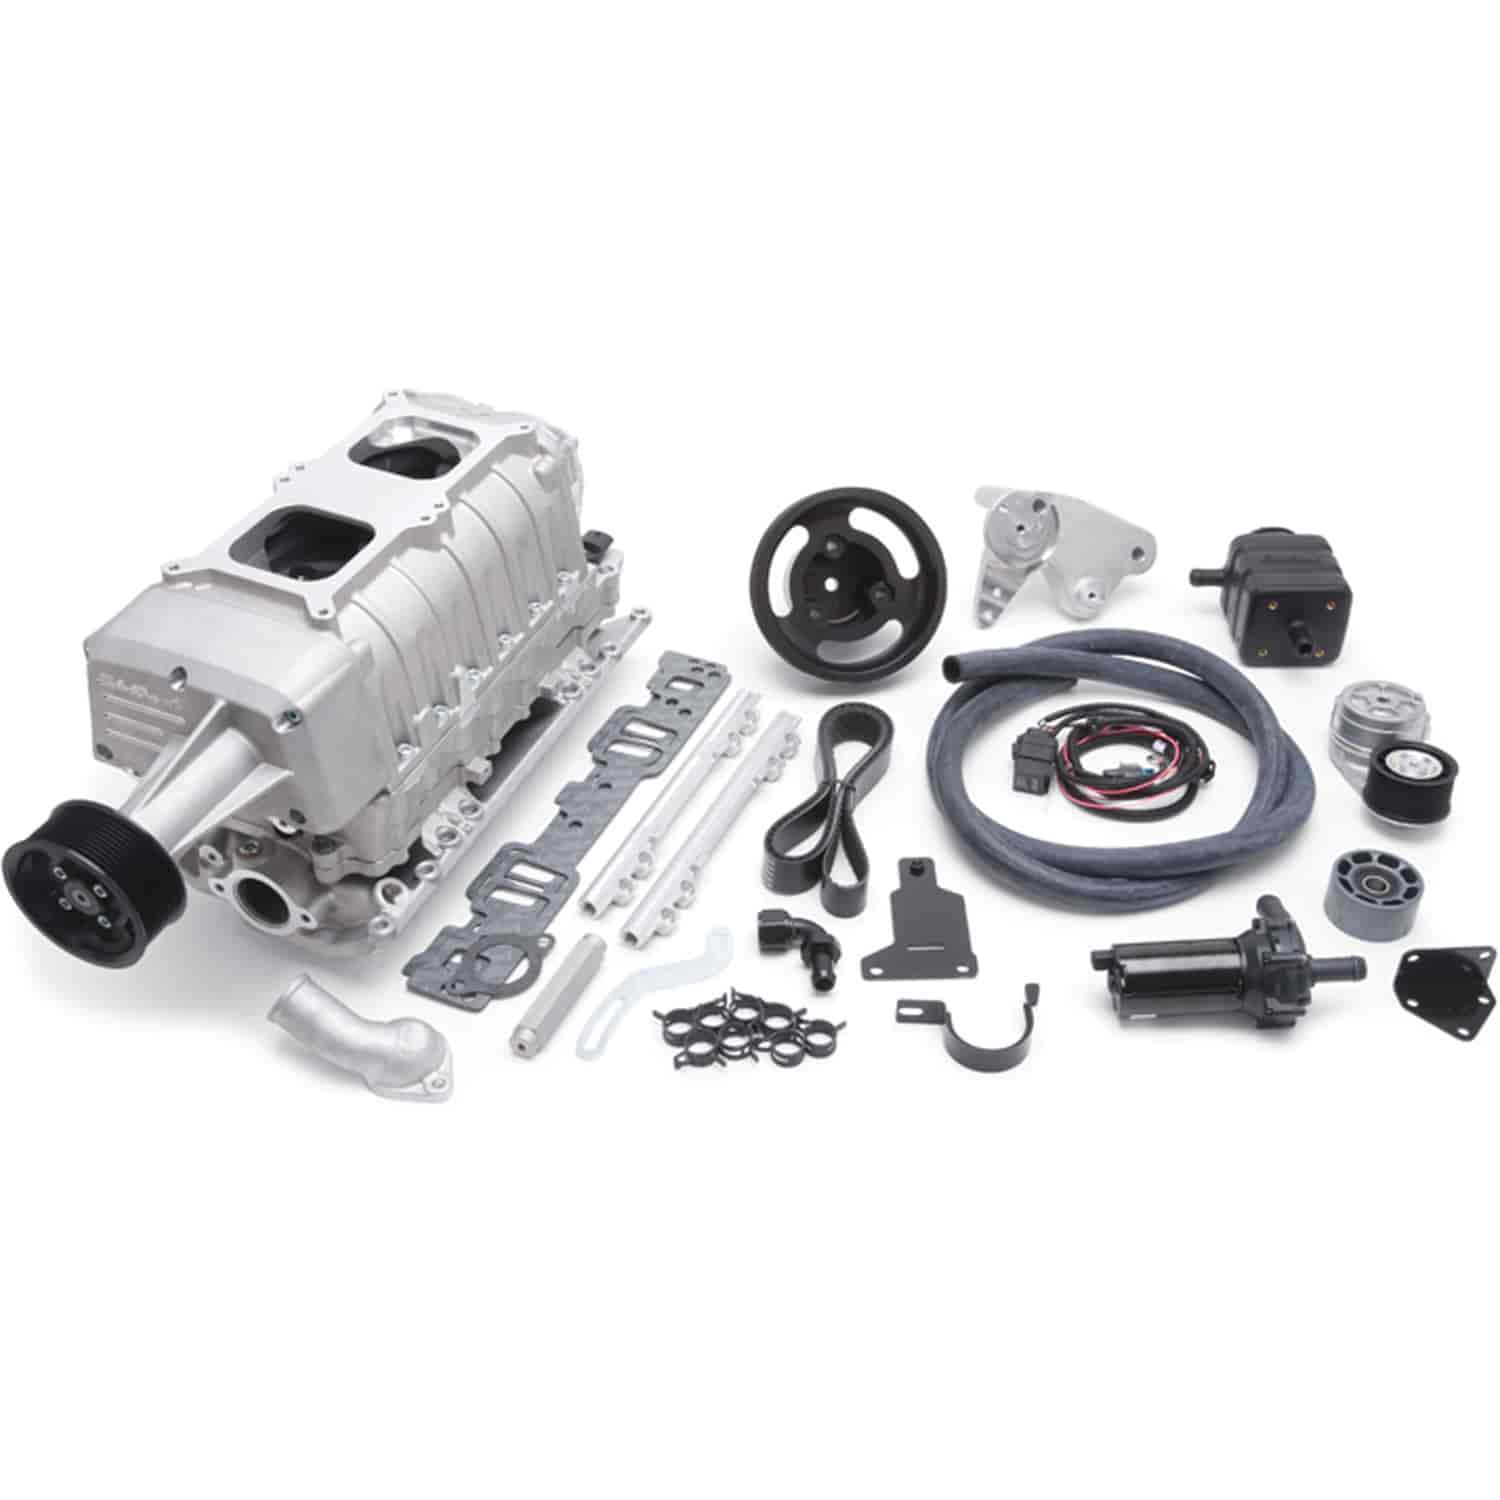 E-Force Enforcer RPM Complete EFI Satin Supercharger Kit for 1955-1986 Small Block Chevy